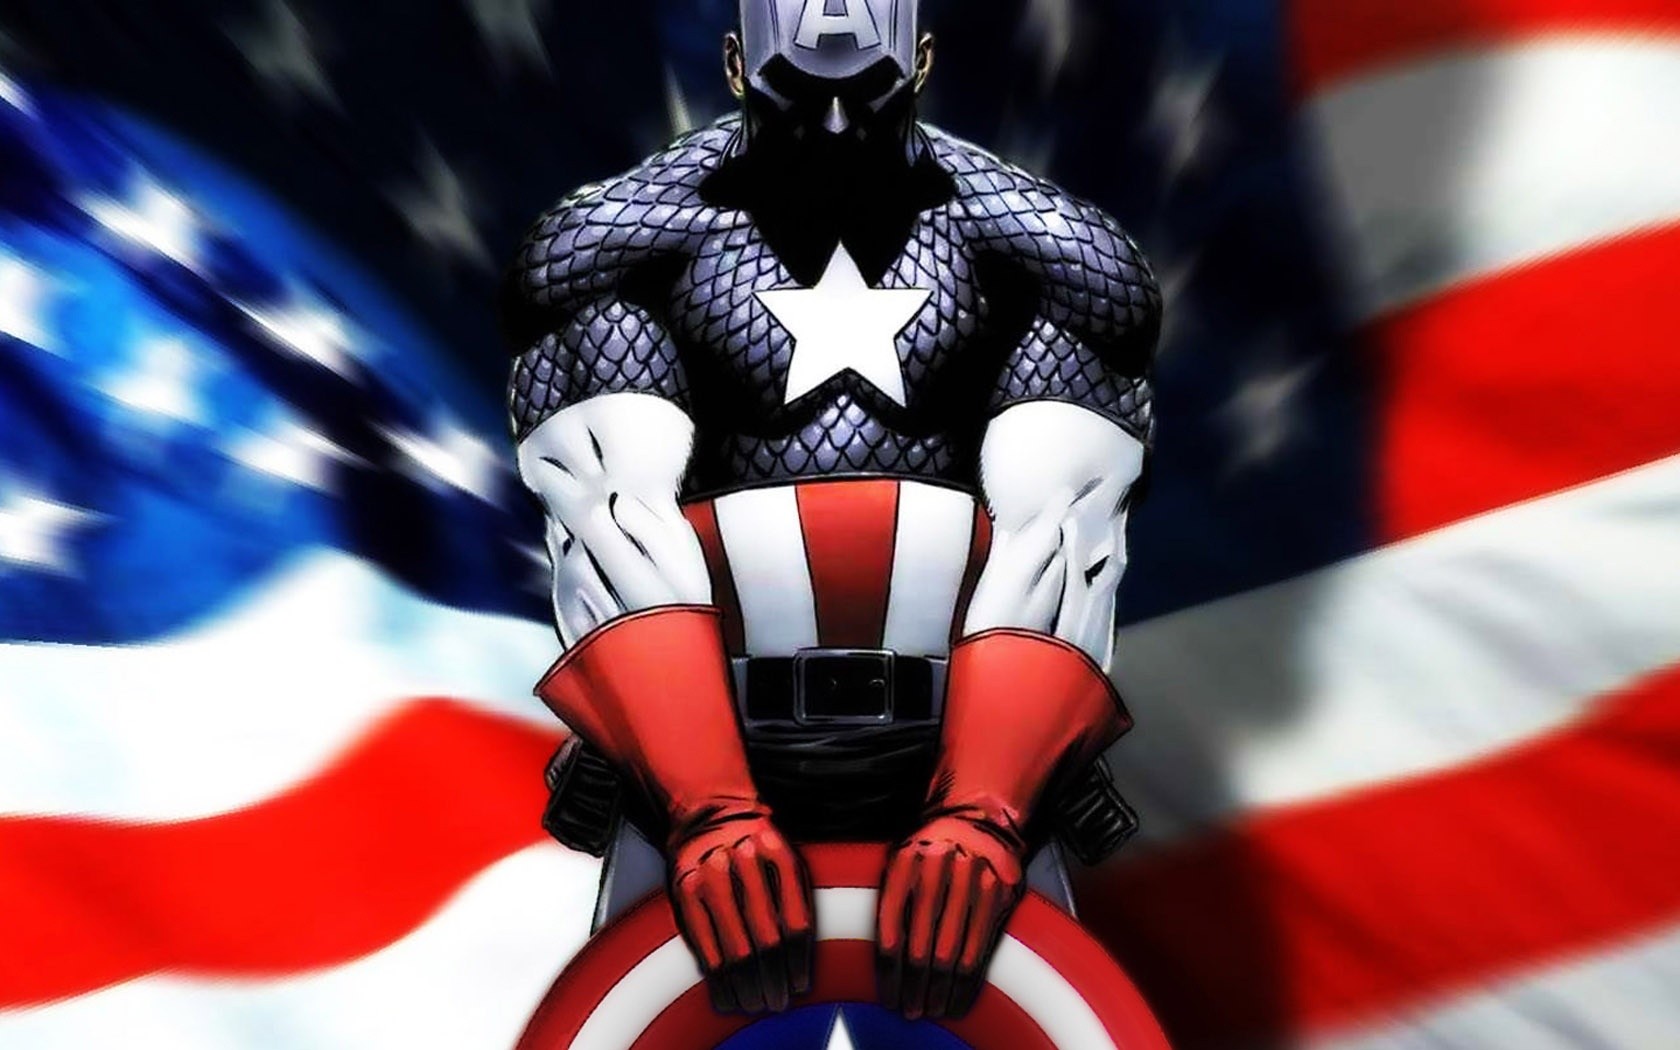 General 1680x1050 frontal view Captain America superhero shield flag American flag muscular The Avengers